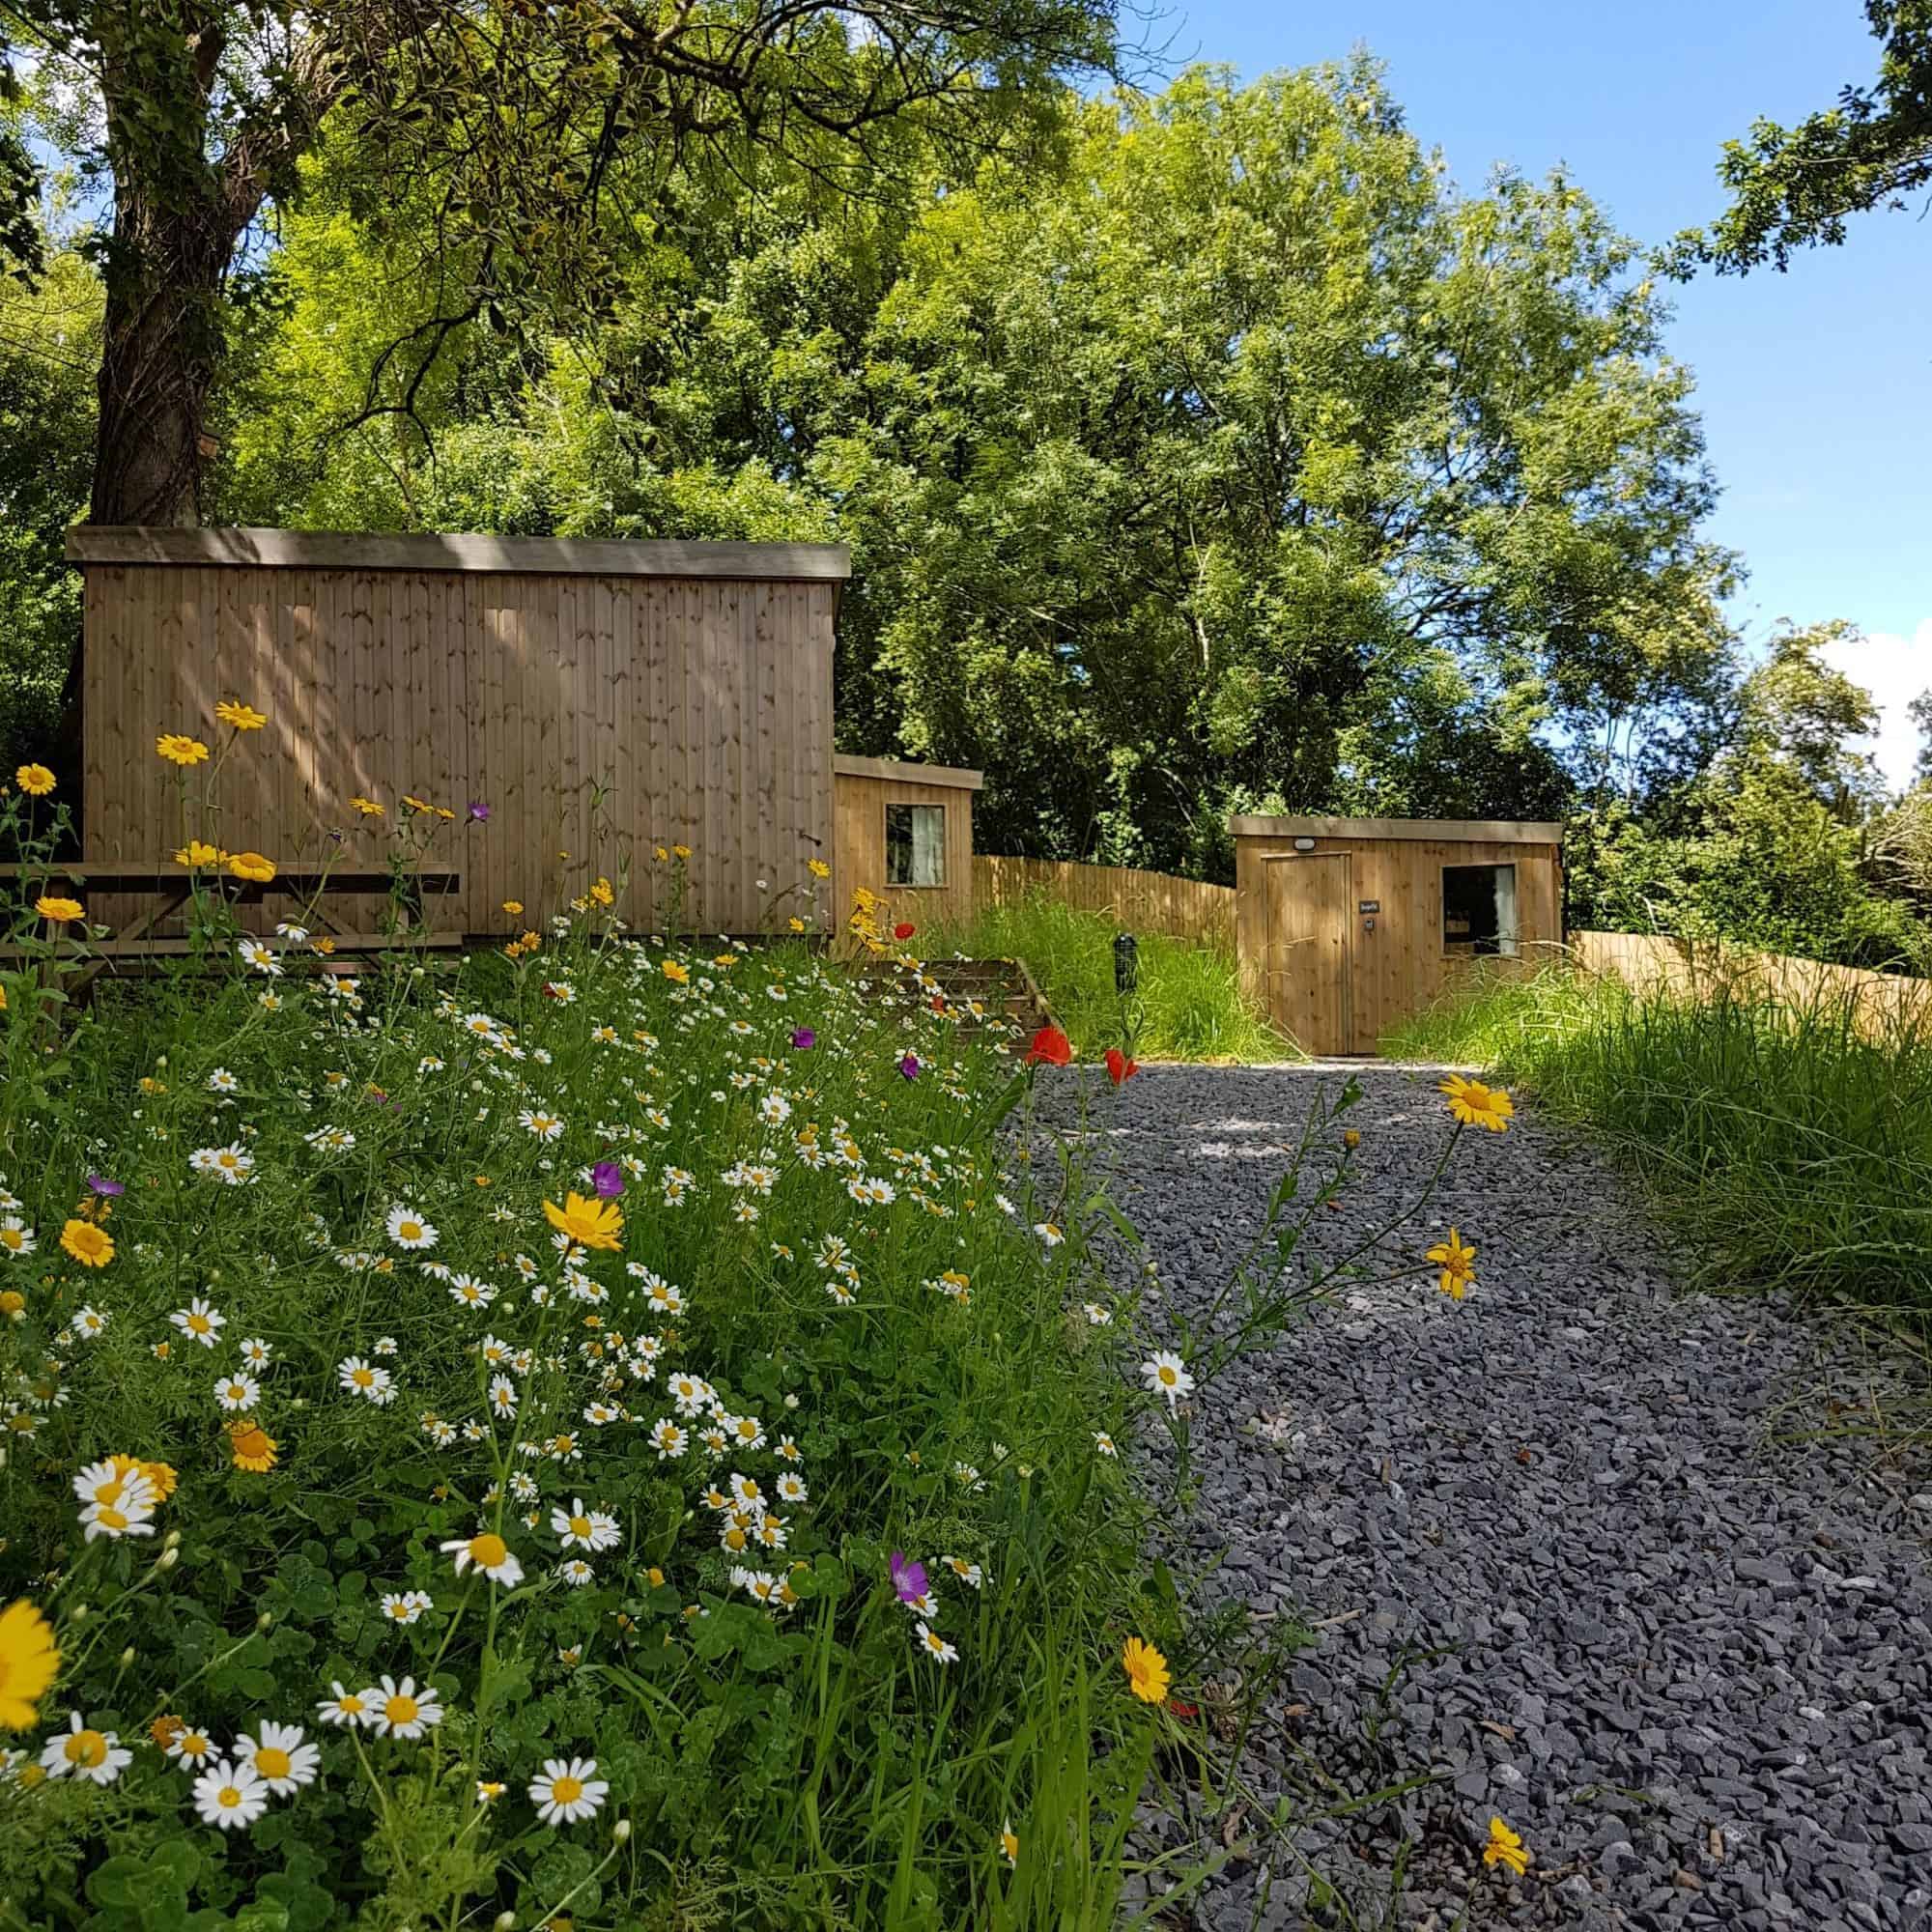 Wooden cabins in surrounded by trees and wild flowers and backed by a blue sky